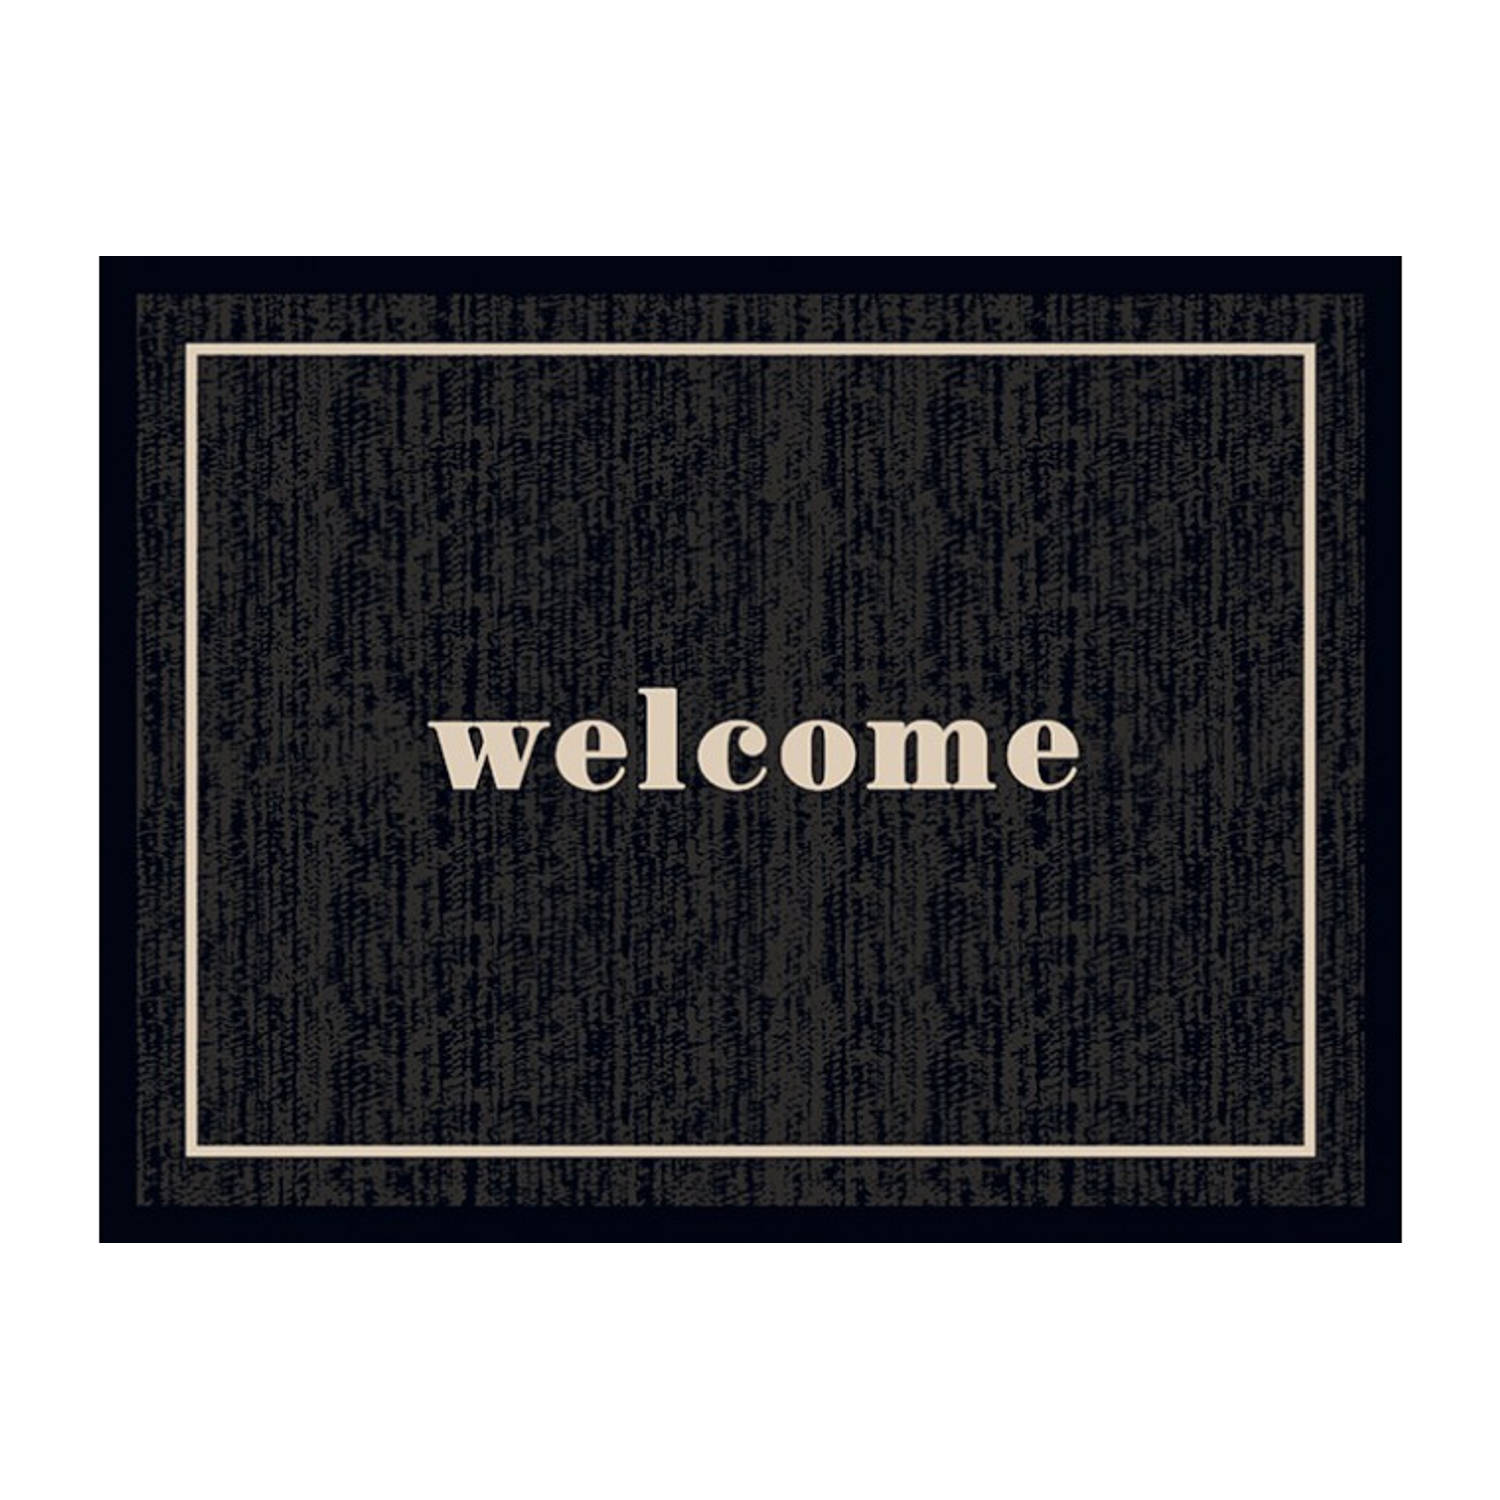 MD Entree - Schoonloopmat - Ambiance Welcome Black - 50 x 70 cm